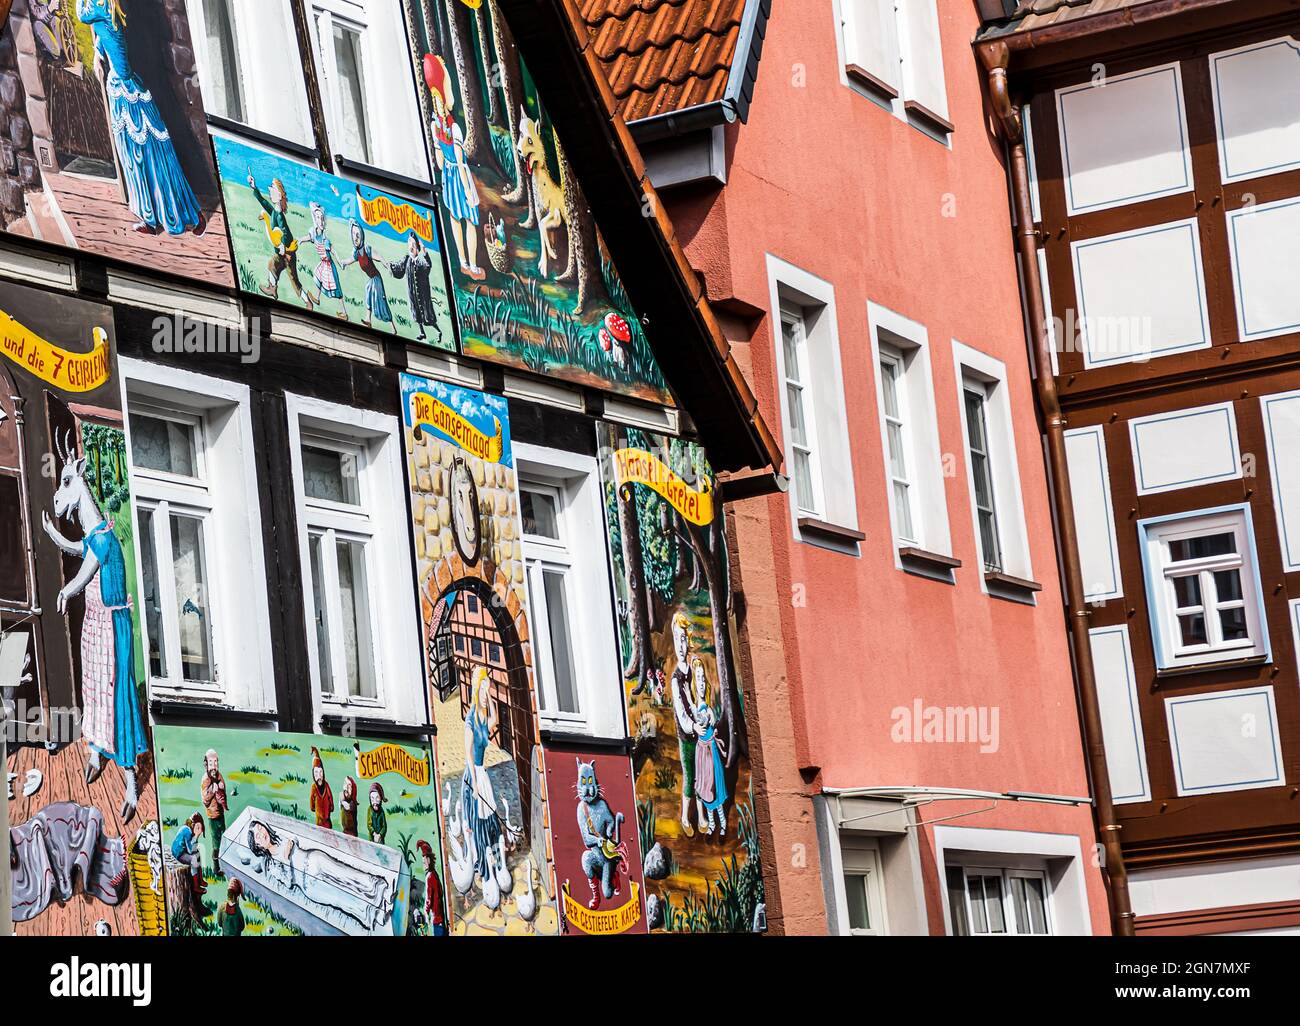 STEINAU, GERMANY- SEPTEMBER 21, 2021: Picturesque painted house with scenes from the Grimm fairy tales, close to the House of the Brothers Grimm. Stock Photo